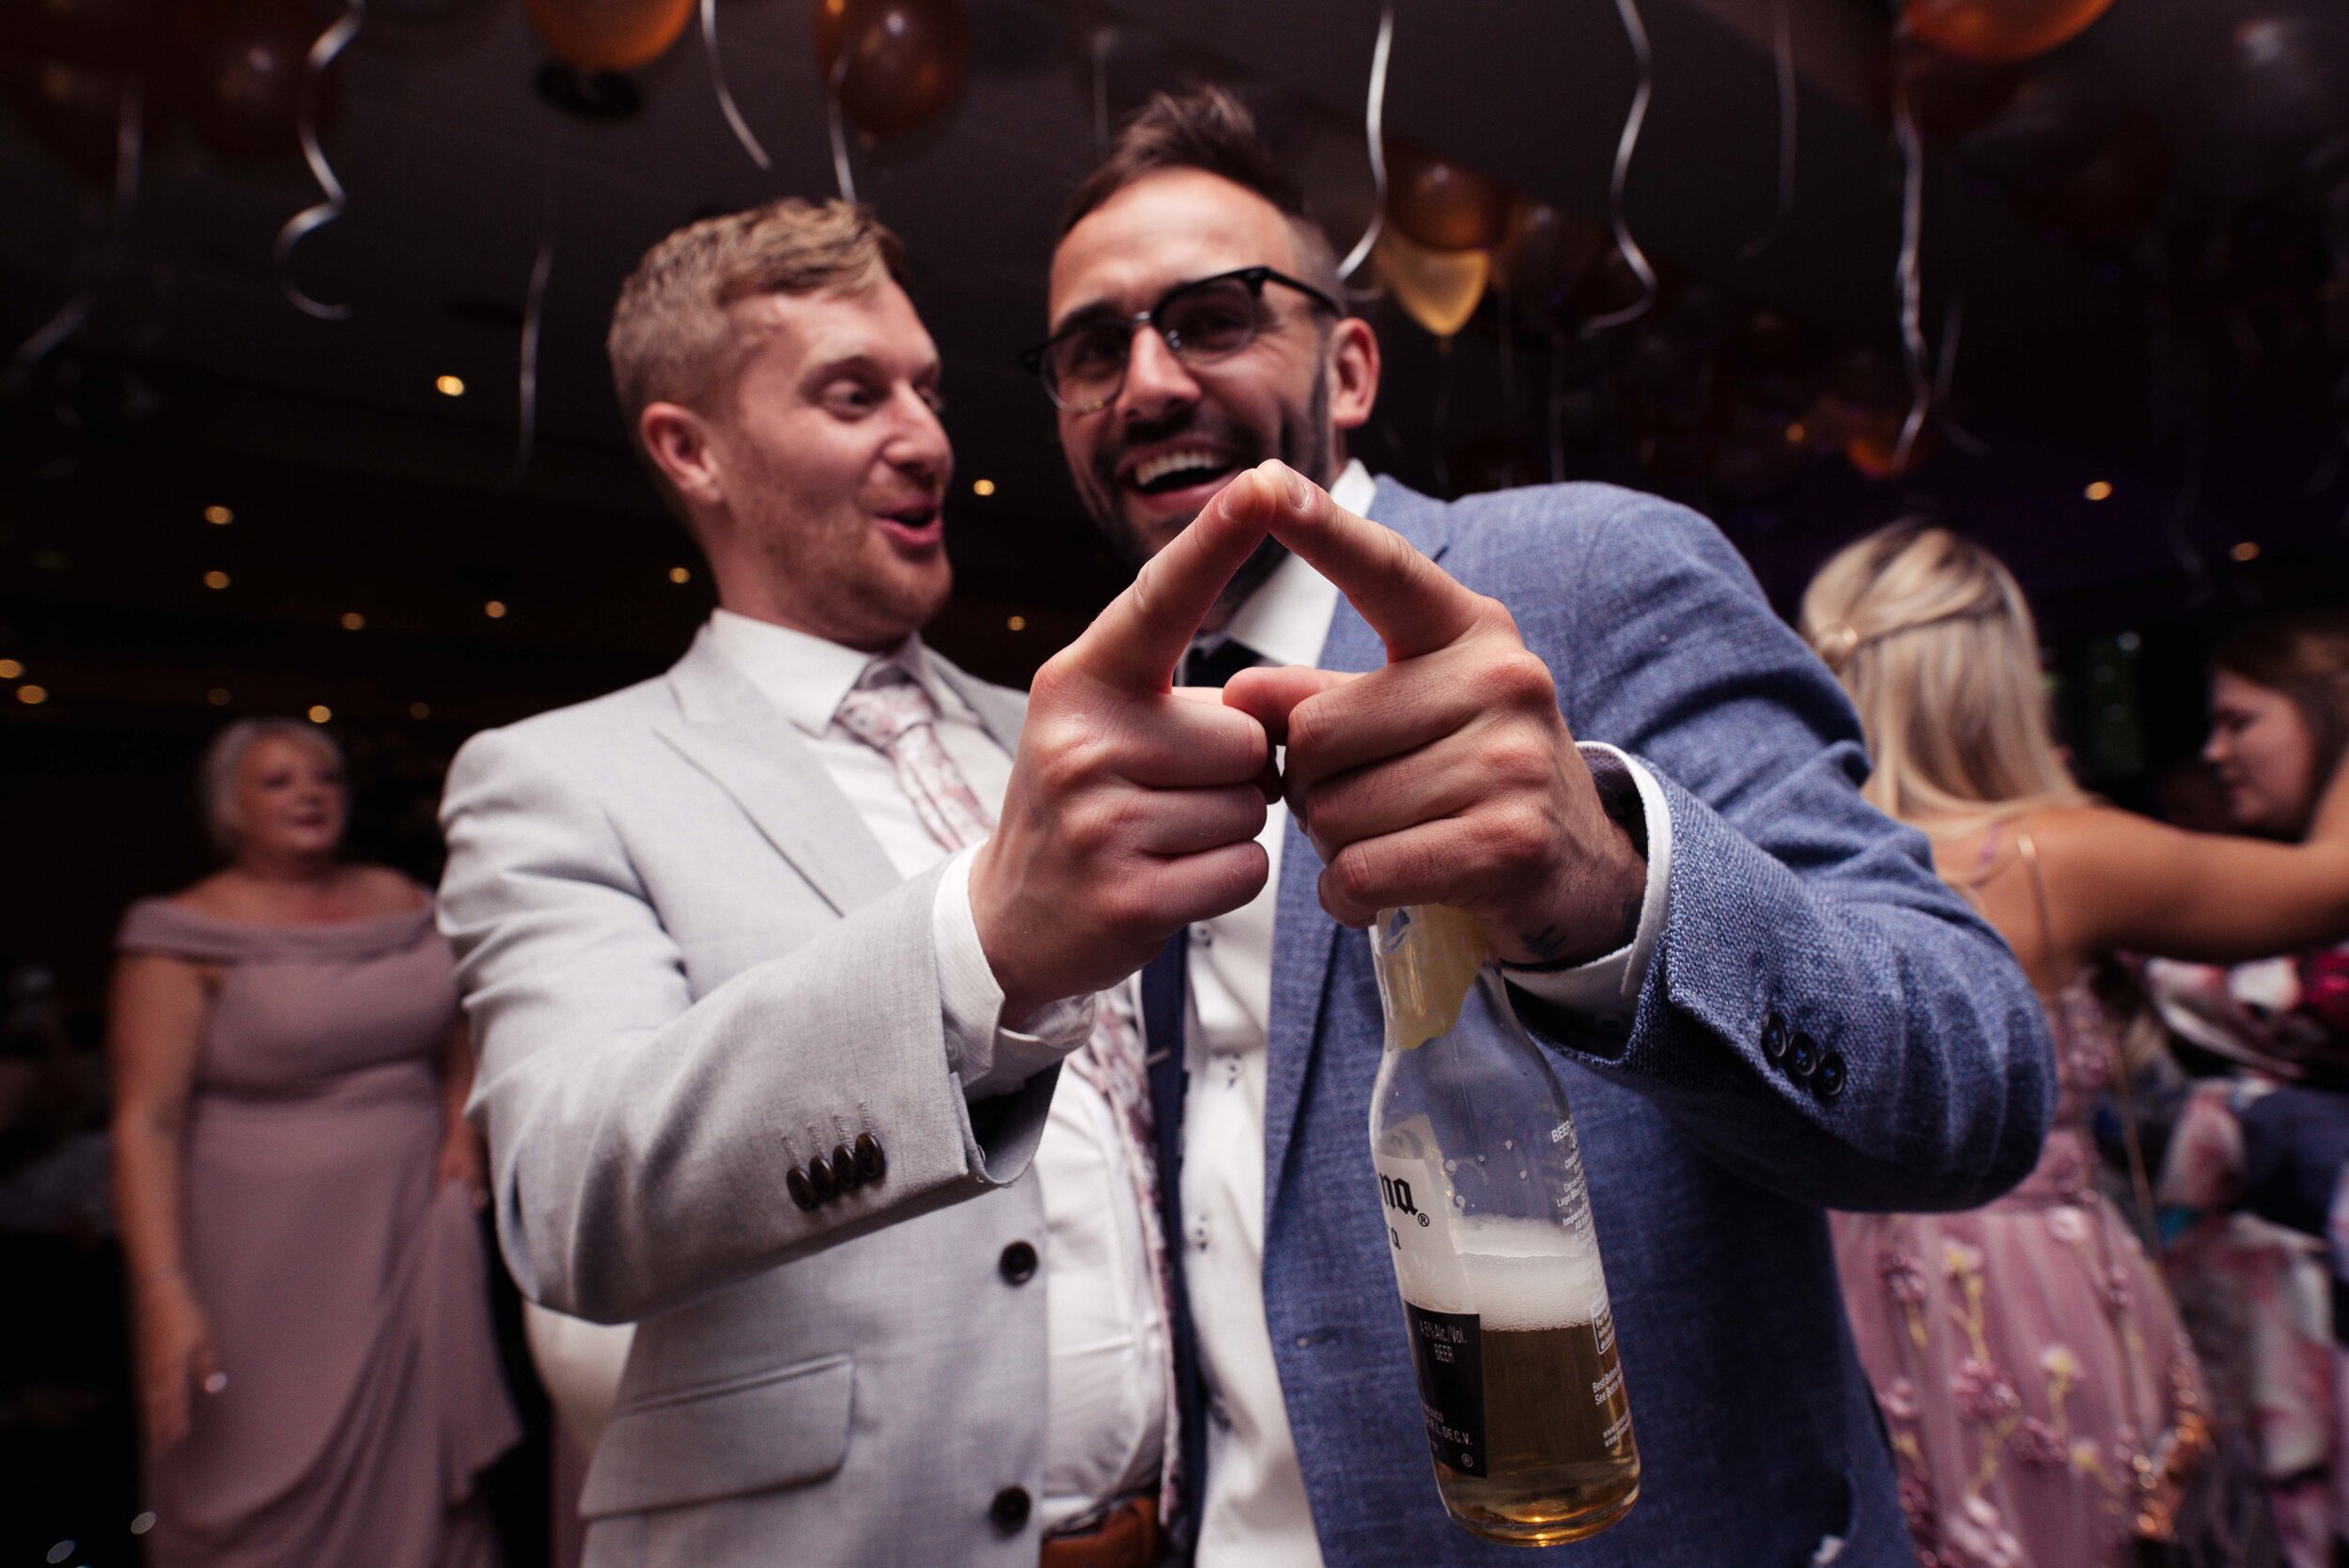 Two male wedding guests pointing towards the camera on the dance floor